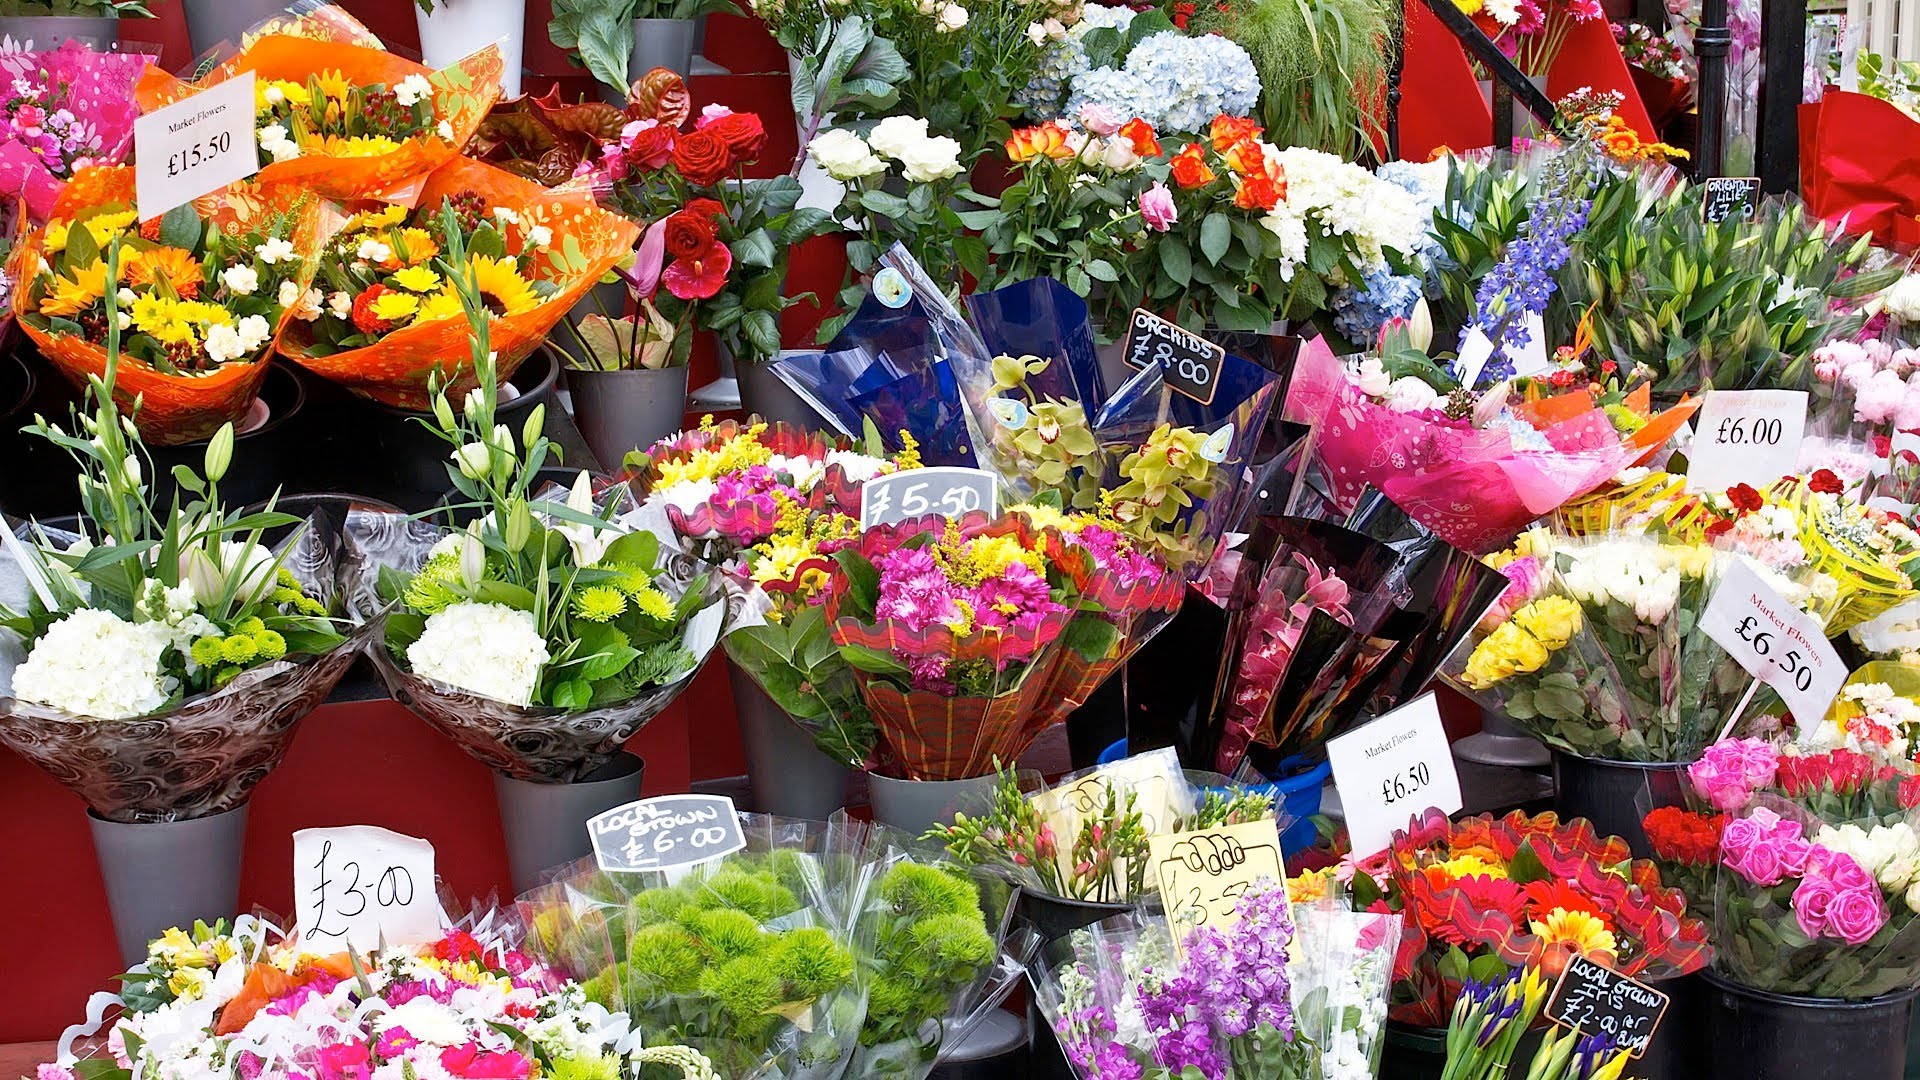 How to Pick Good Flowers from a Bodega | Wedding Flowers